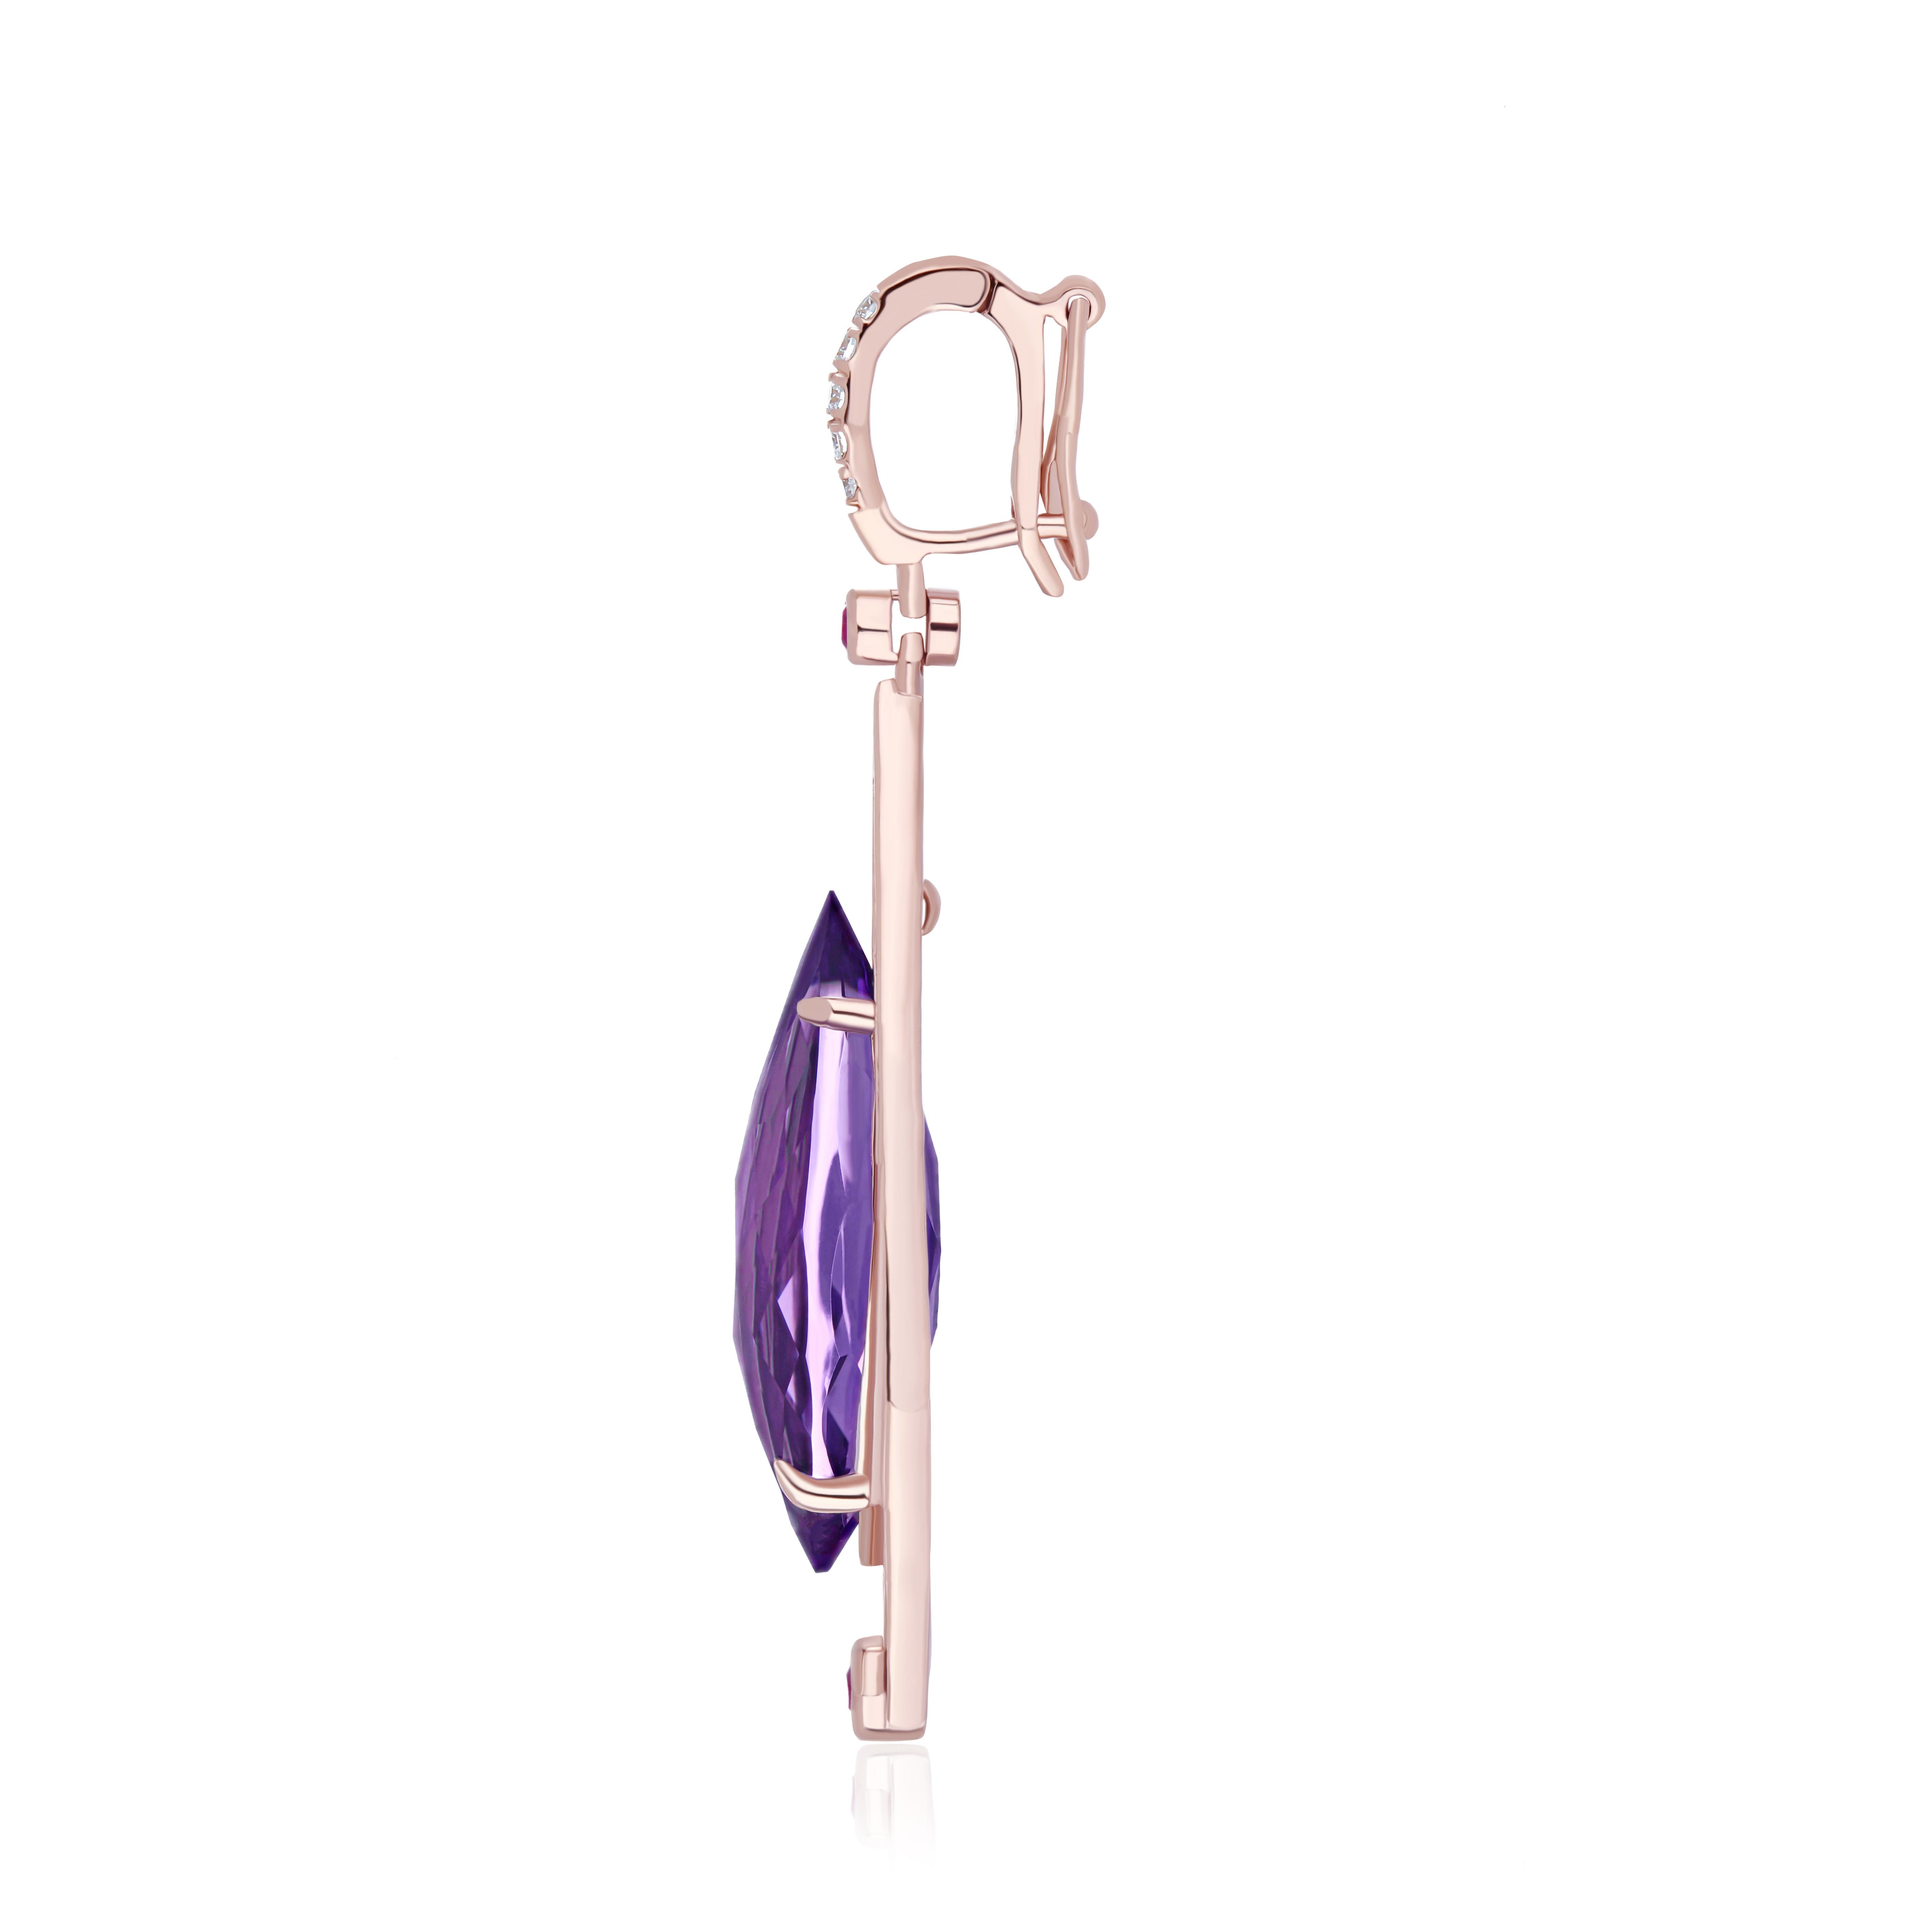 Elegant and Exquisitely Detailed 14Karat Rose Gold Pendant studded with Amethyst in Marquise Shape weighing approx. 5.17Cts and contrasting vibrant Red Ruby in Round Shape weighing 0.07Cts further enhanced with micro pave Set Diamond weighing